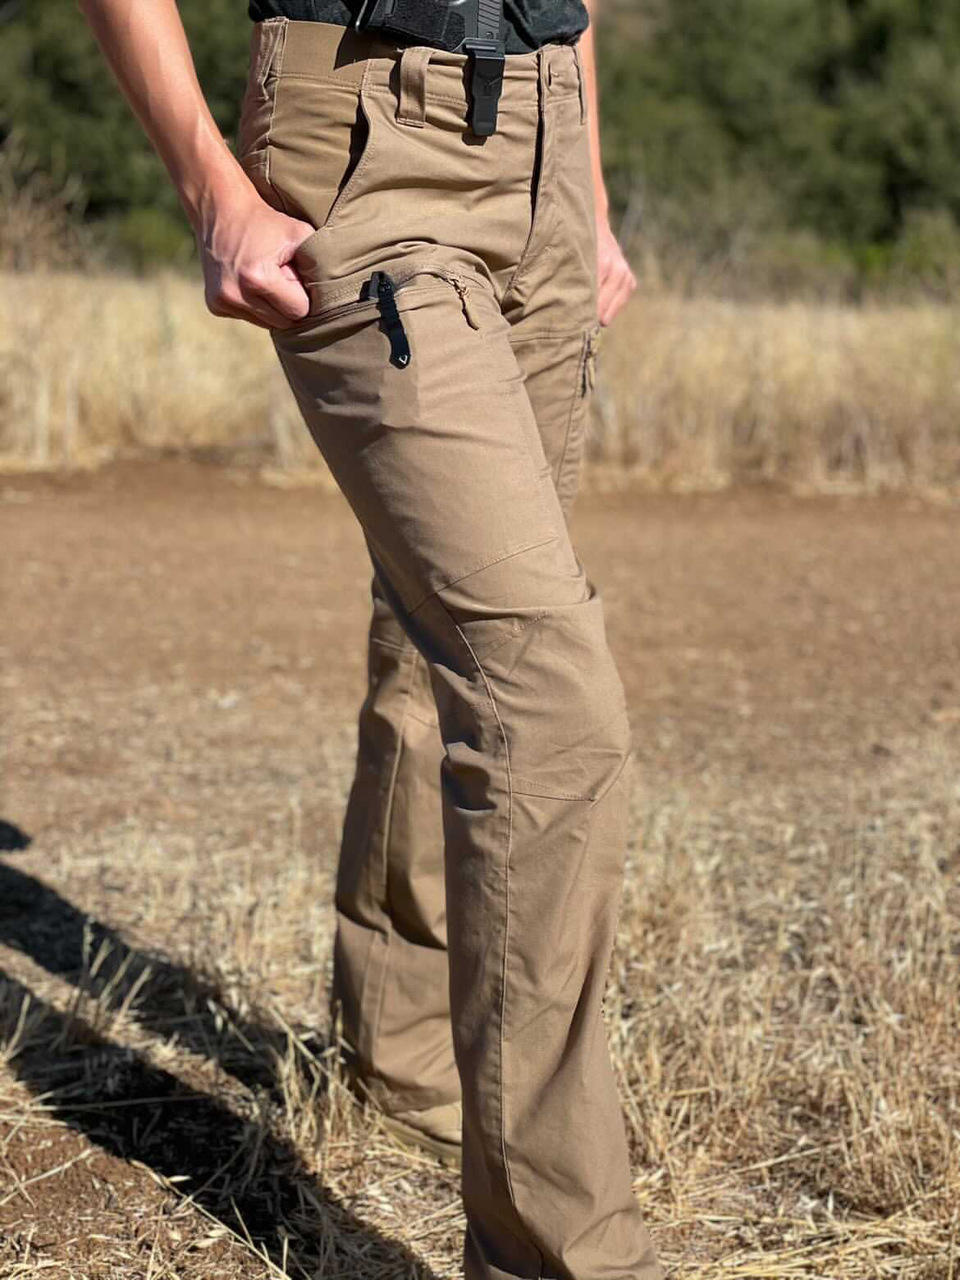 6 Best Women's Tactical Pants [Tested] - Pew Pew Tactical